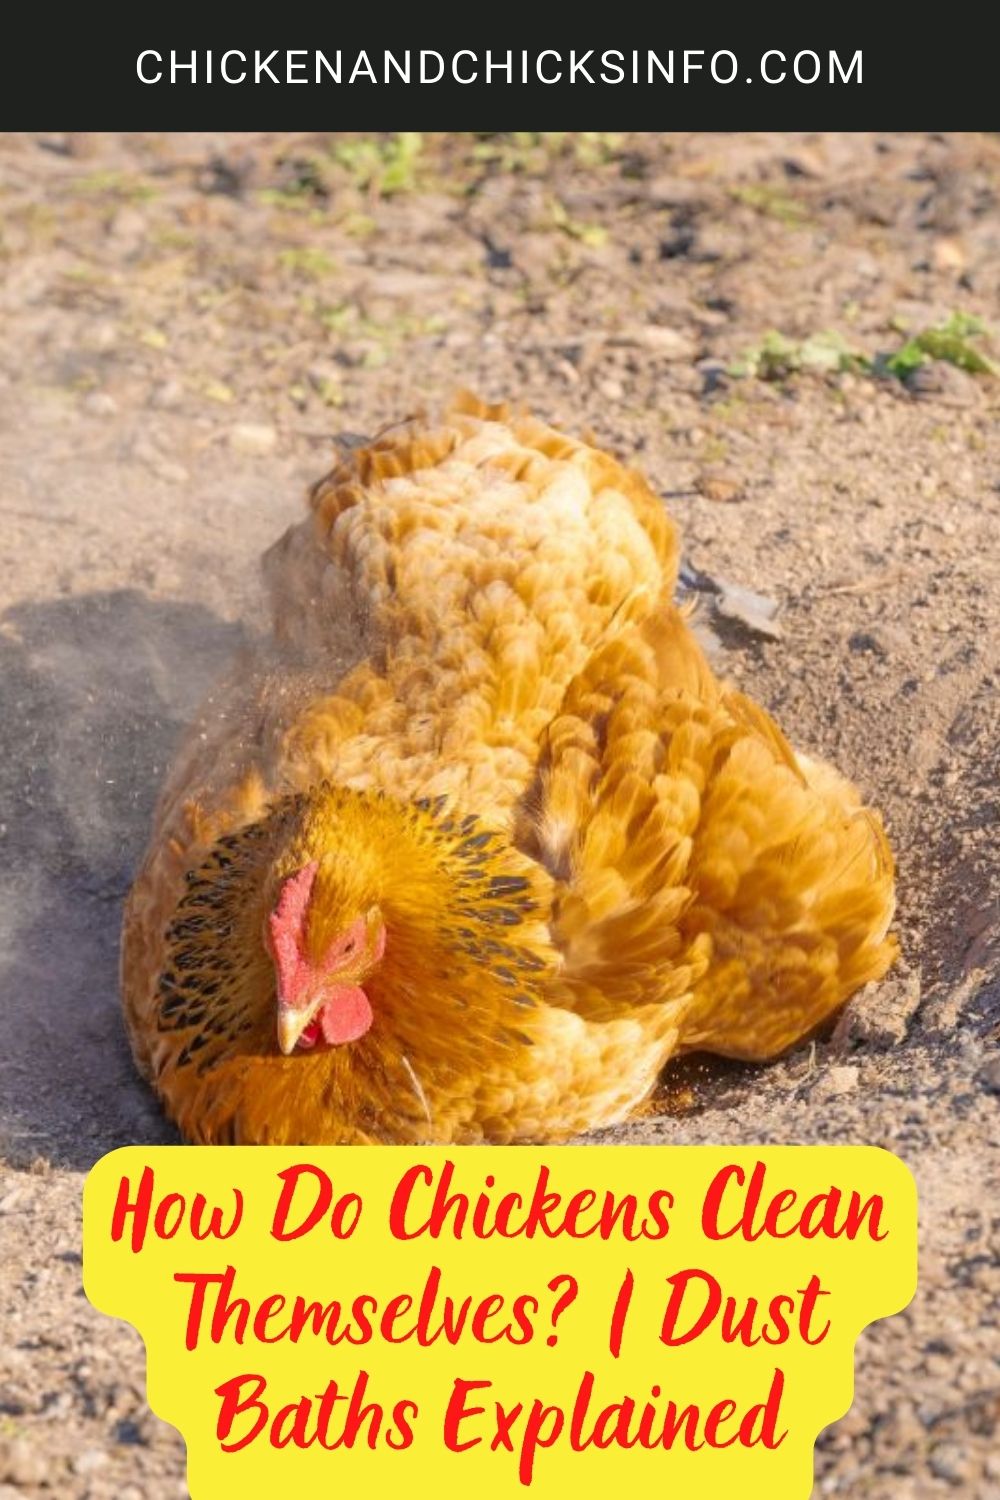 How Do Chickens Clean Themselves? | Dust Baths Explained poster.
